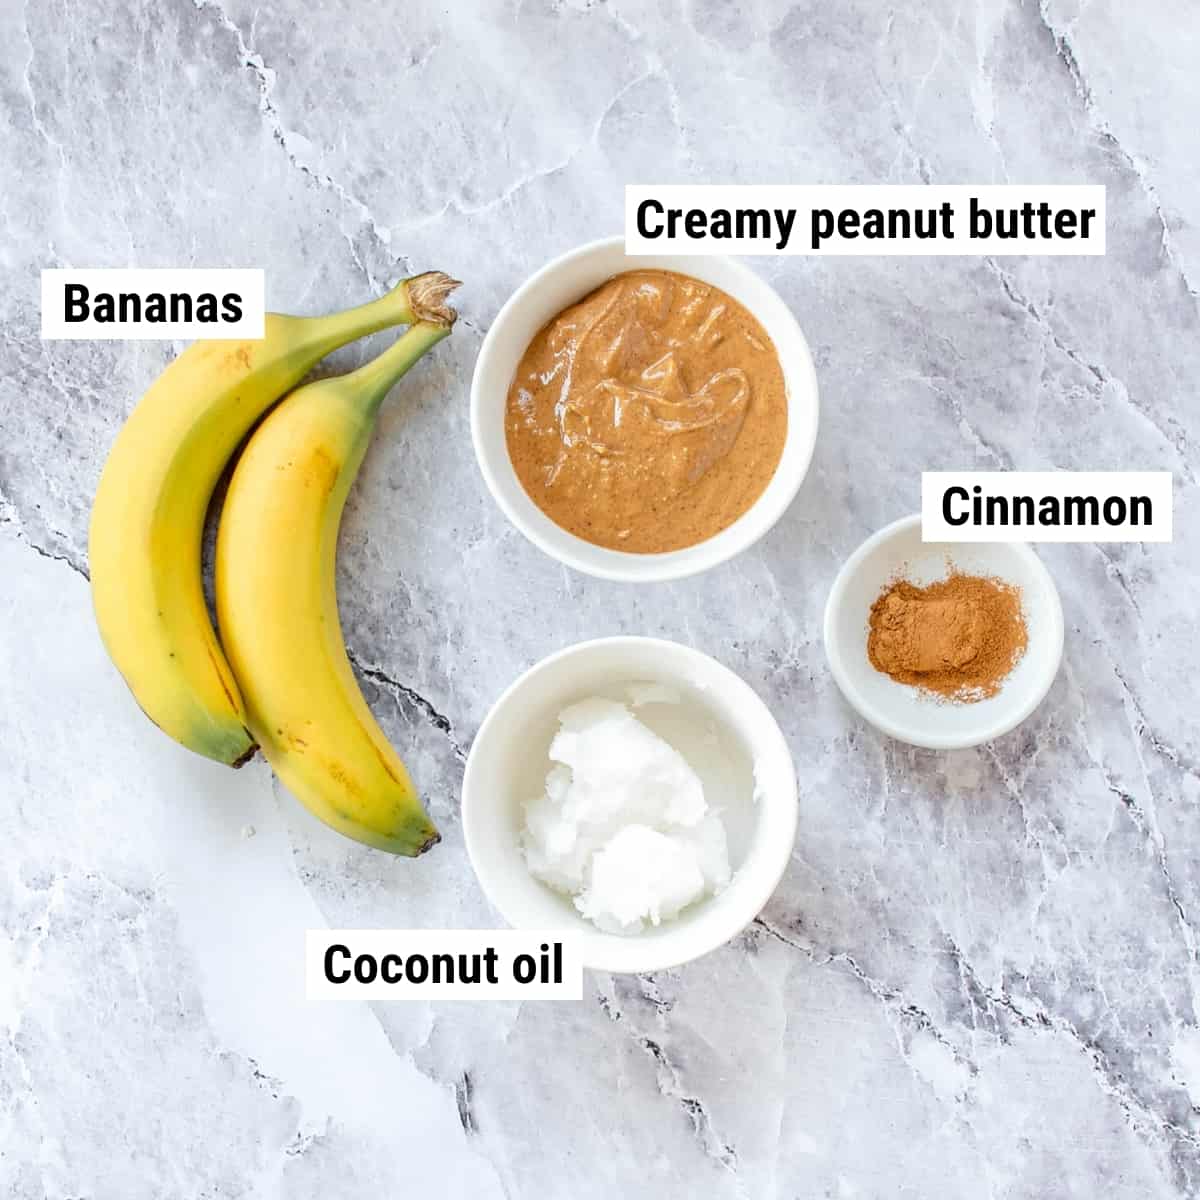 The ingredients to make banana fudge spread out on a table.